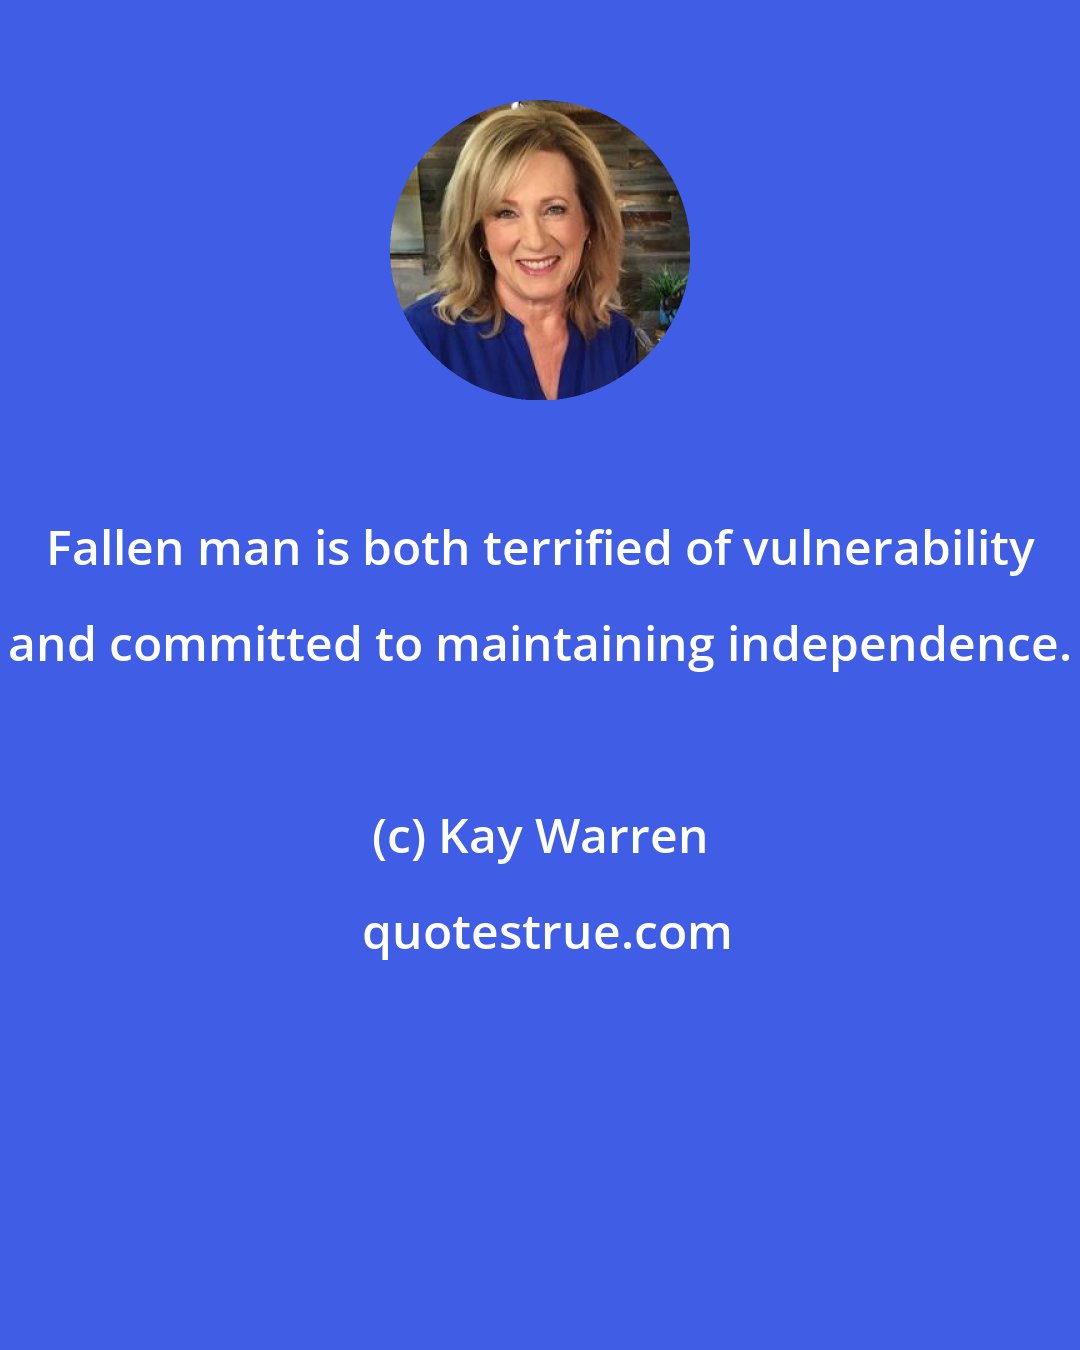 Kay Warren: Fallen man is both terrified of vulnerability and committed to maintaining independence.